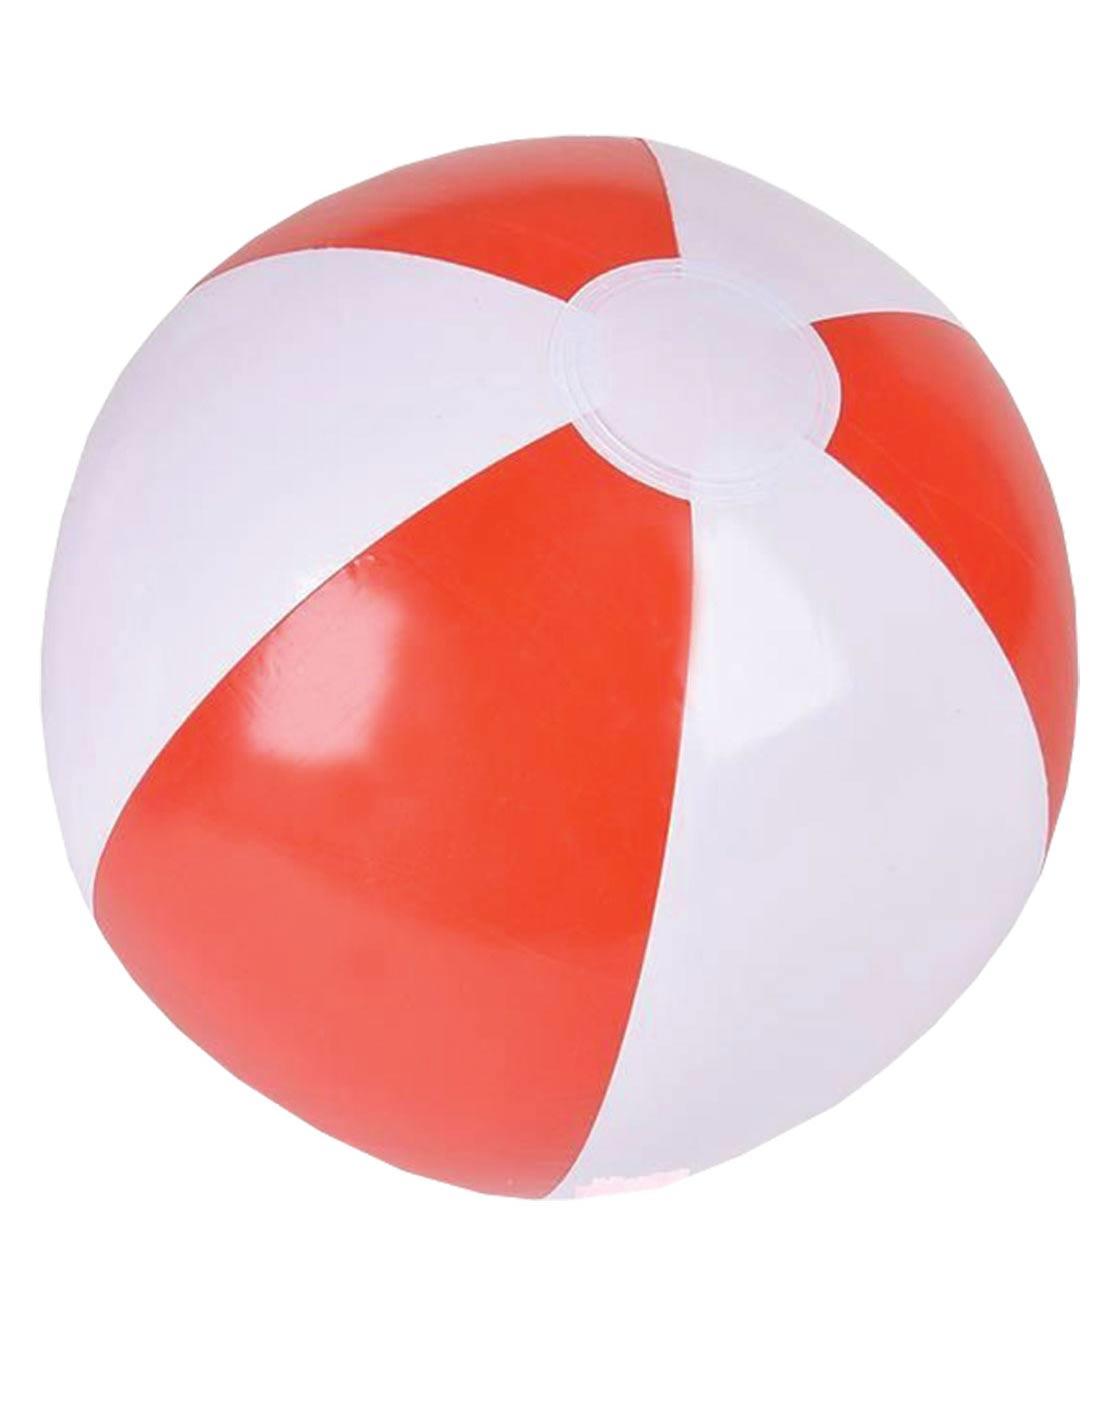 England Inflatable Beach Ball for Sporting and St George's Day celebrations by Amscan 9903661 available here at Karnival Costumes online party shop